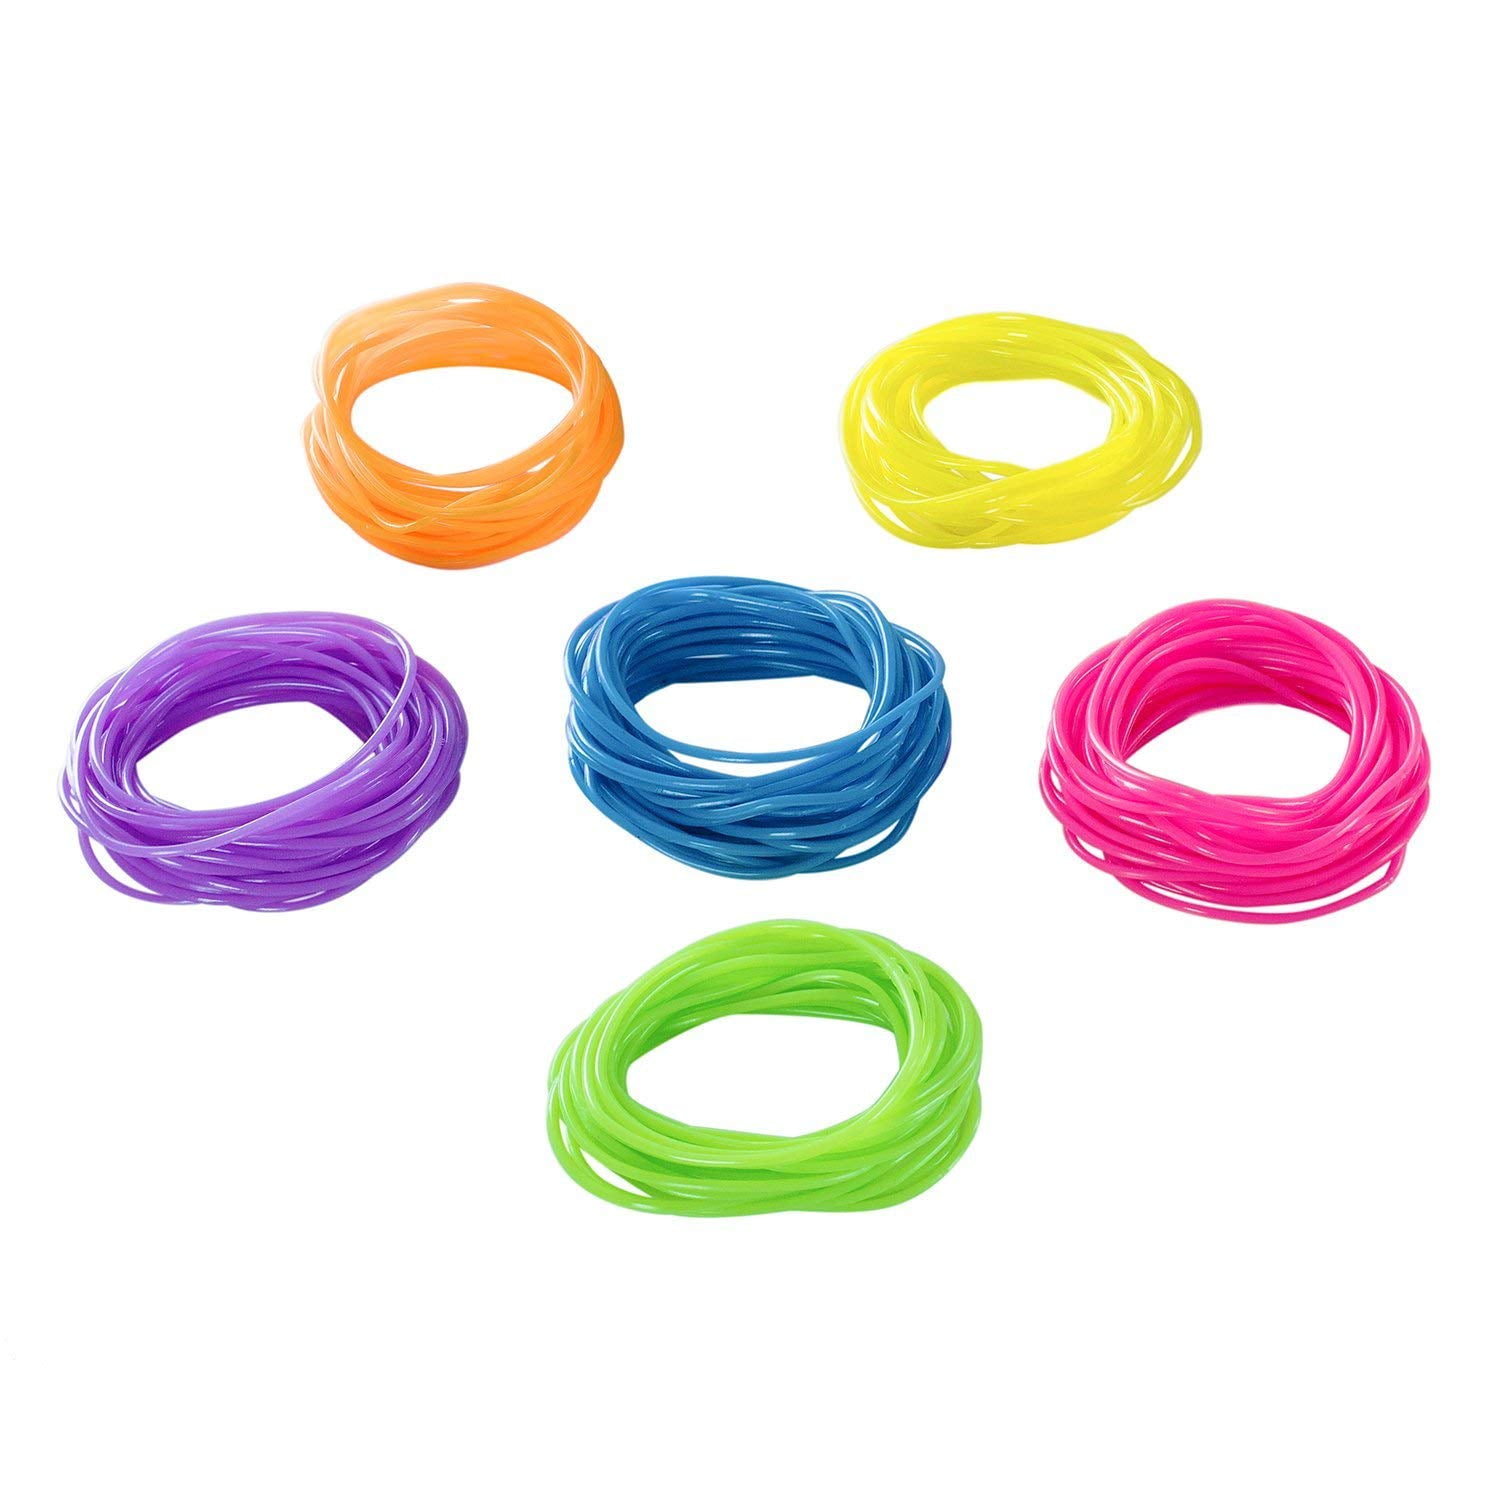 FAST SHIPPING GOODY BAGS 144 RAINBOW NEON JELLY BRACELETS,PARTY FAVOR PINATAS 